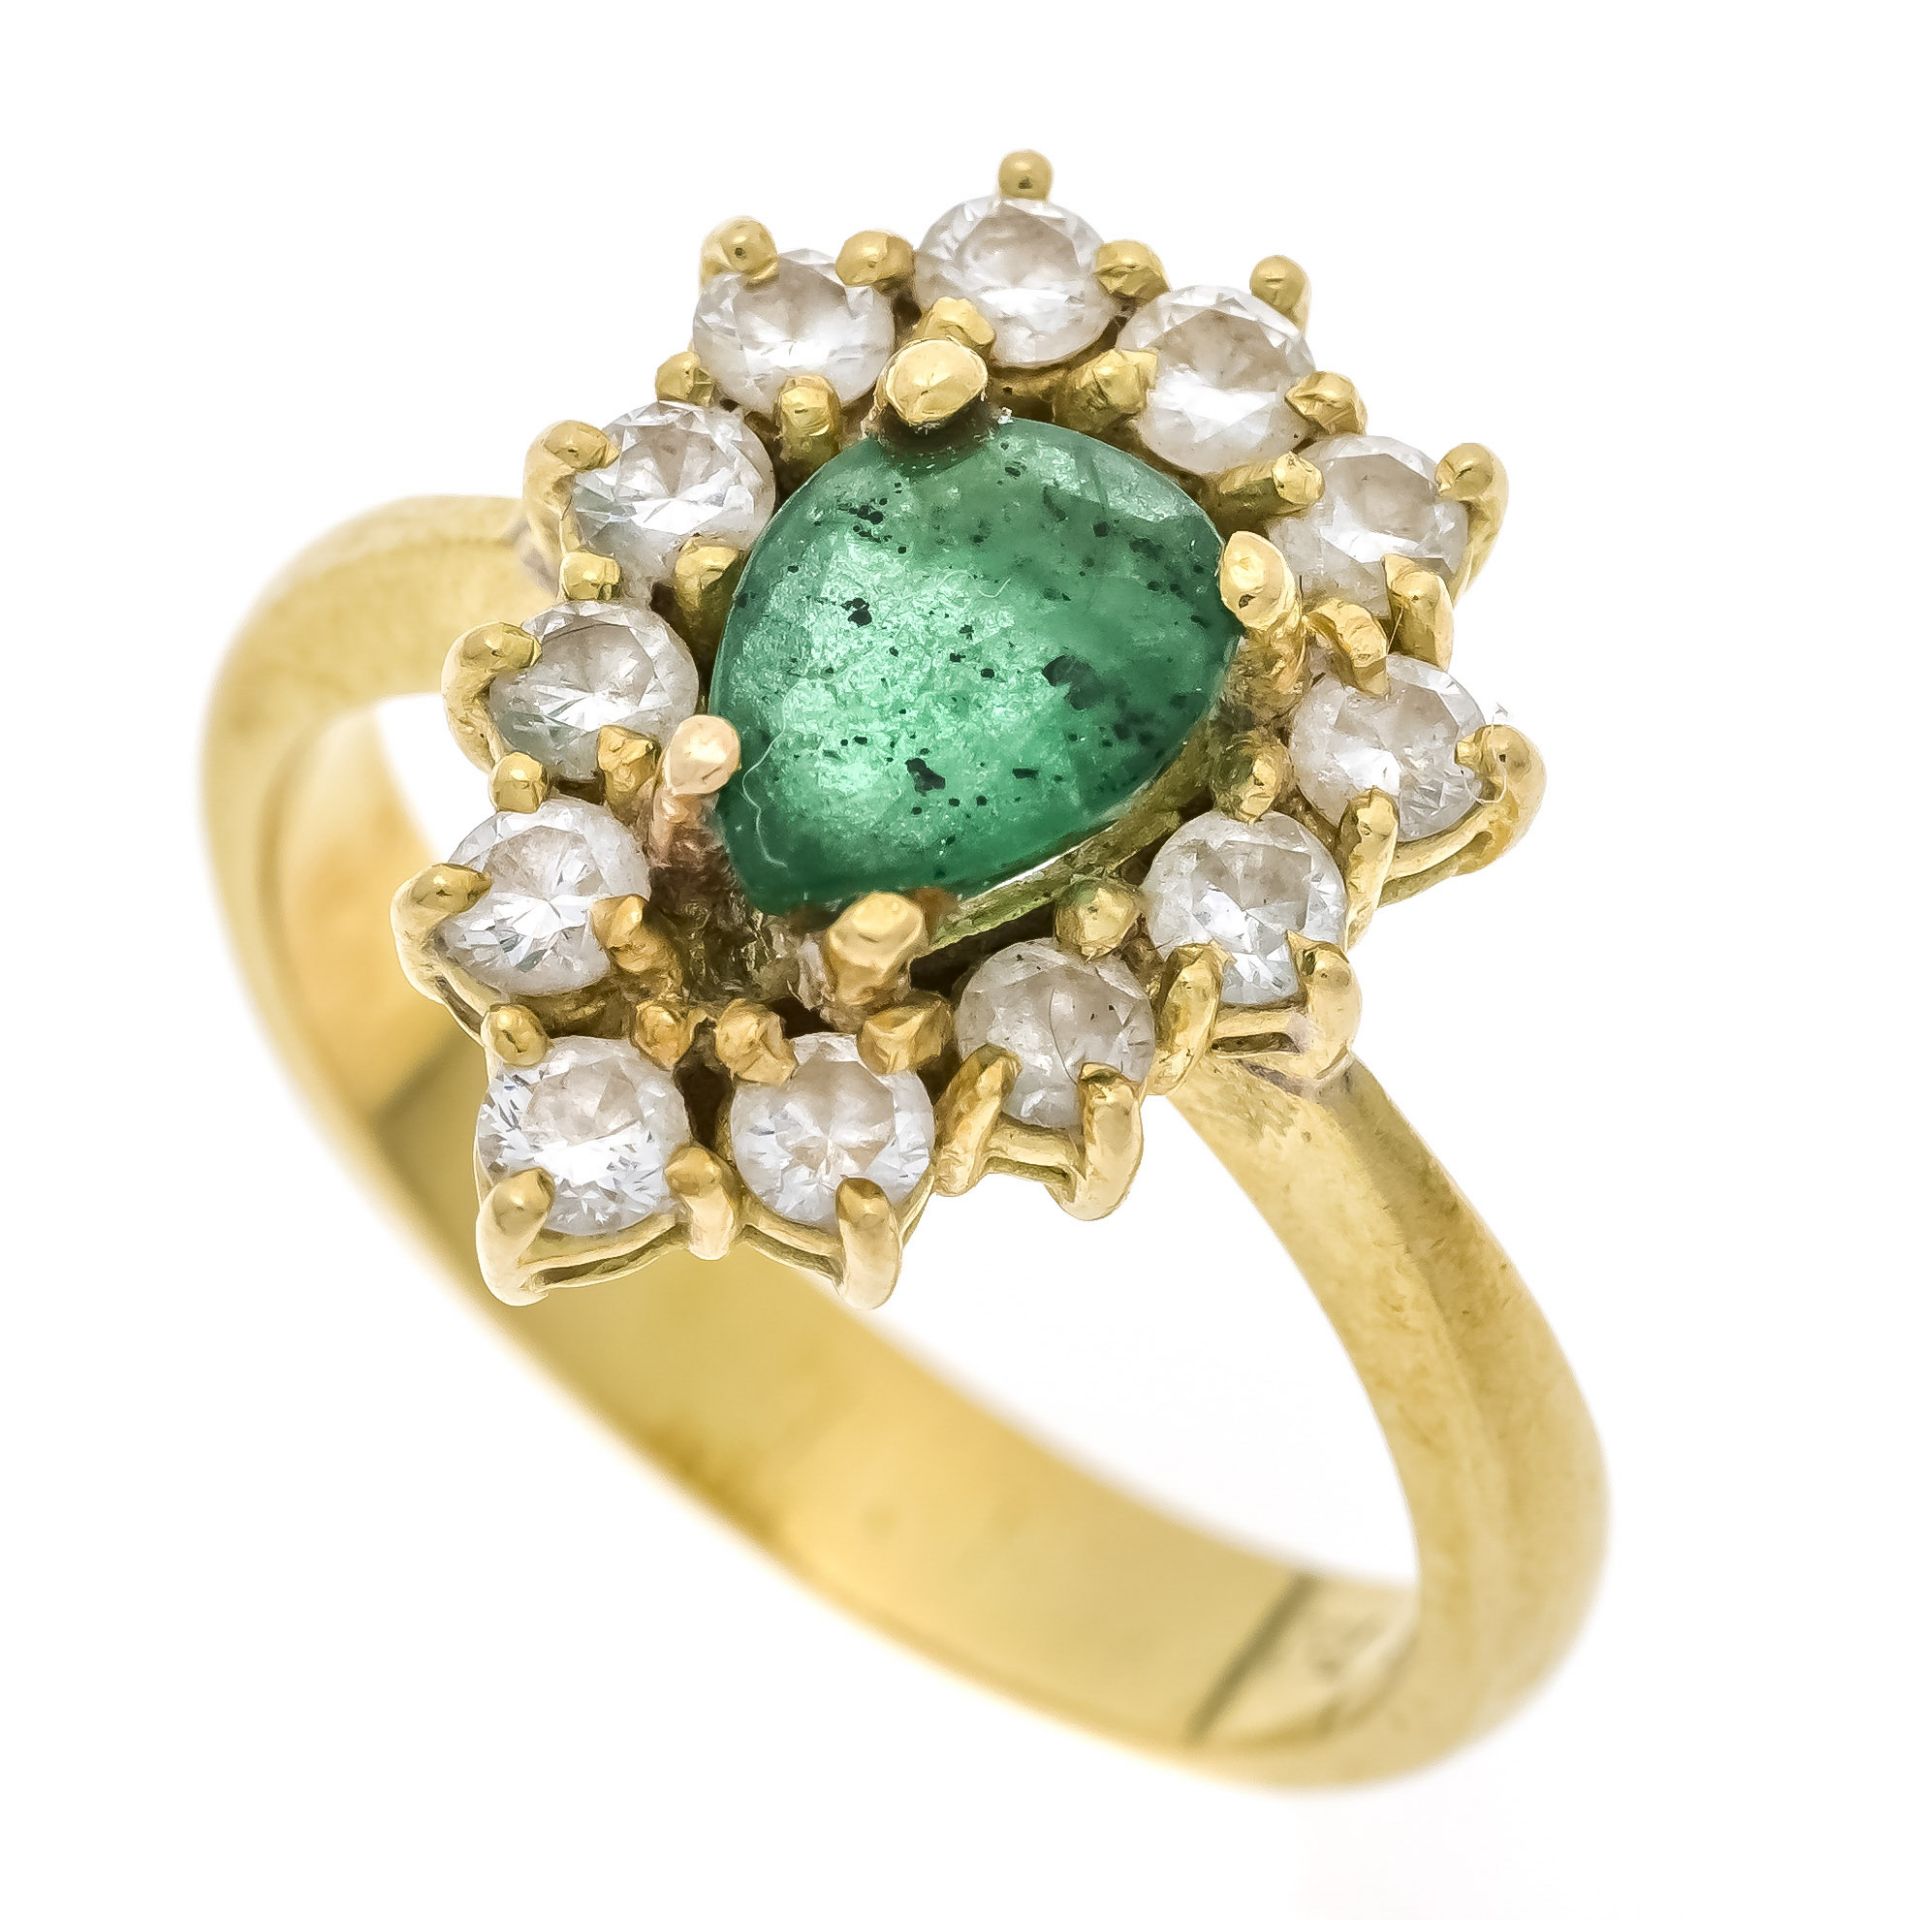 Emerald-brilliant ring GG 750/000 with a faceted emerald drop 0.70 ct green, translucent and 12